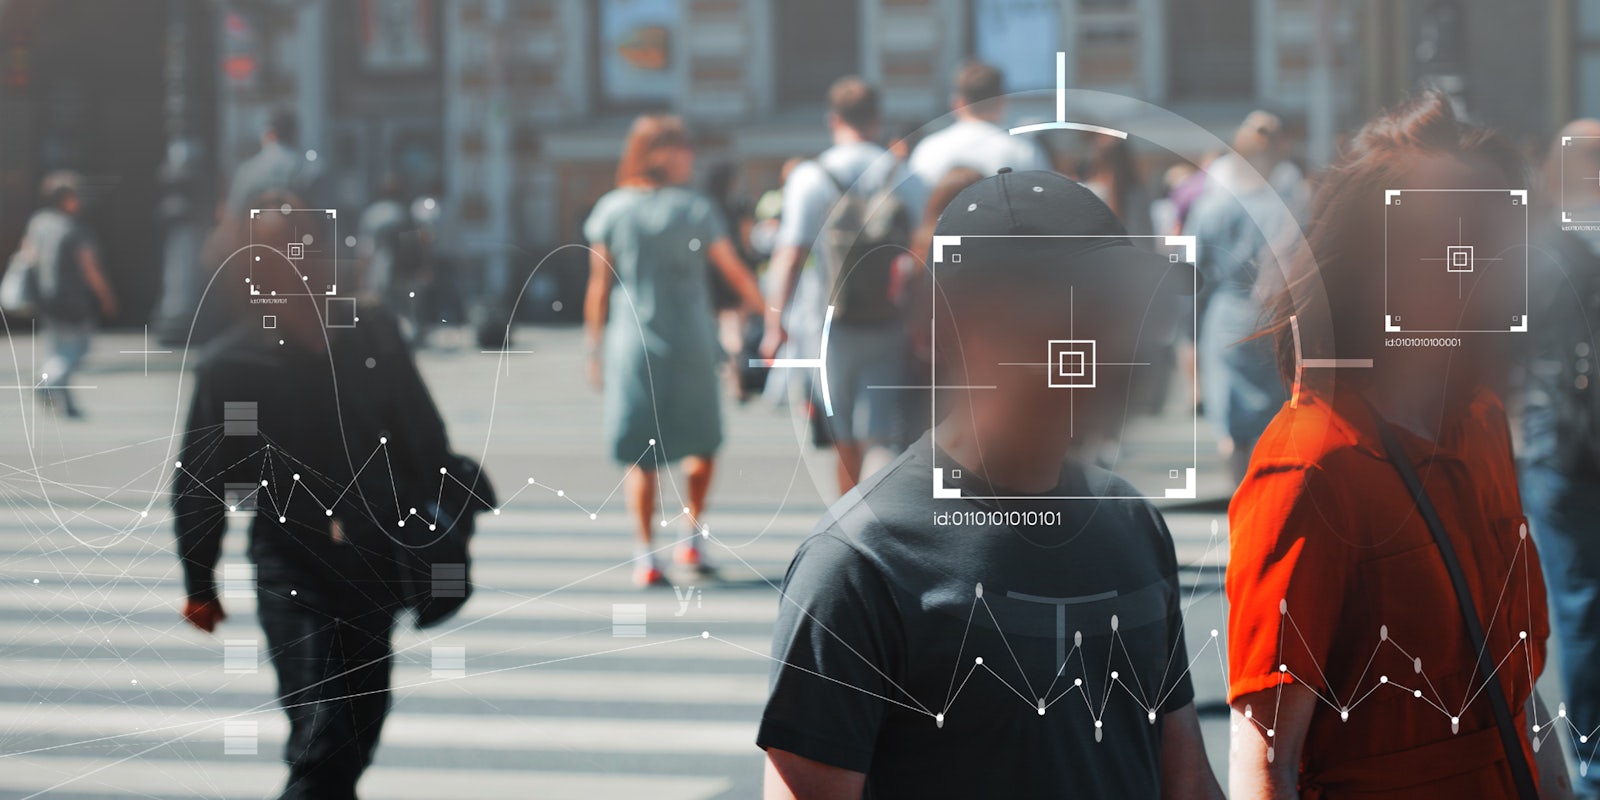 People walking on a street. Their faces are blurred and facial recognition technology is being used on them.